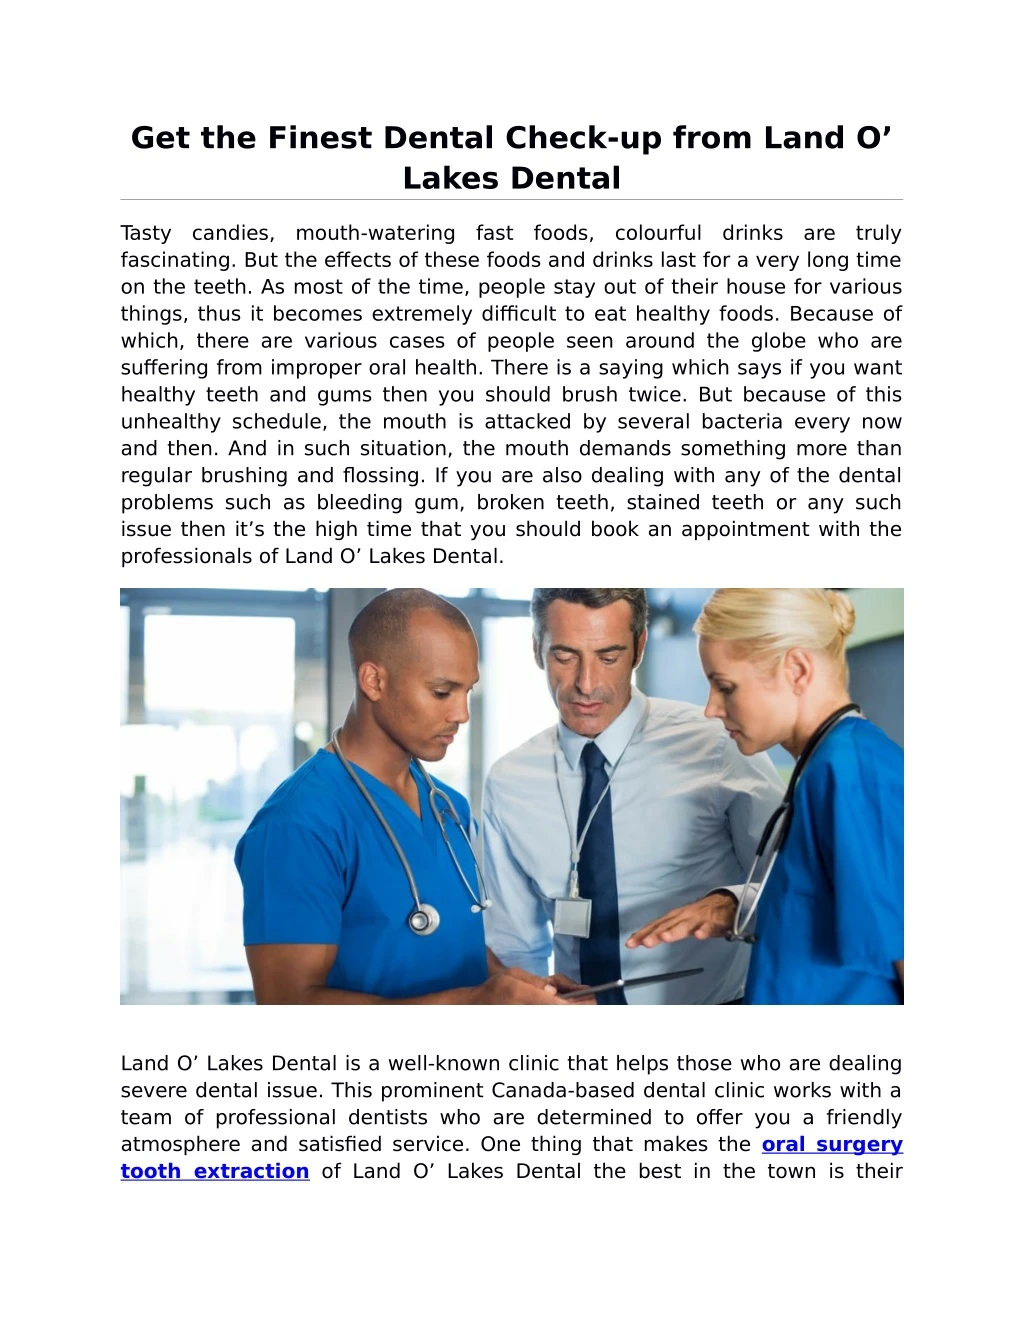 get the finest dental check up from land o lakes